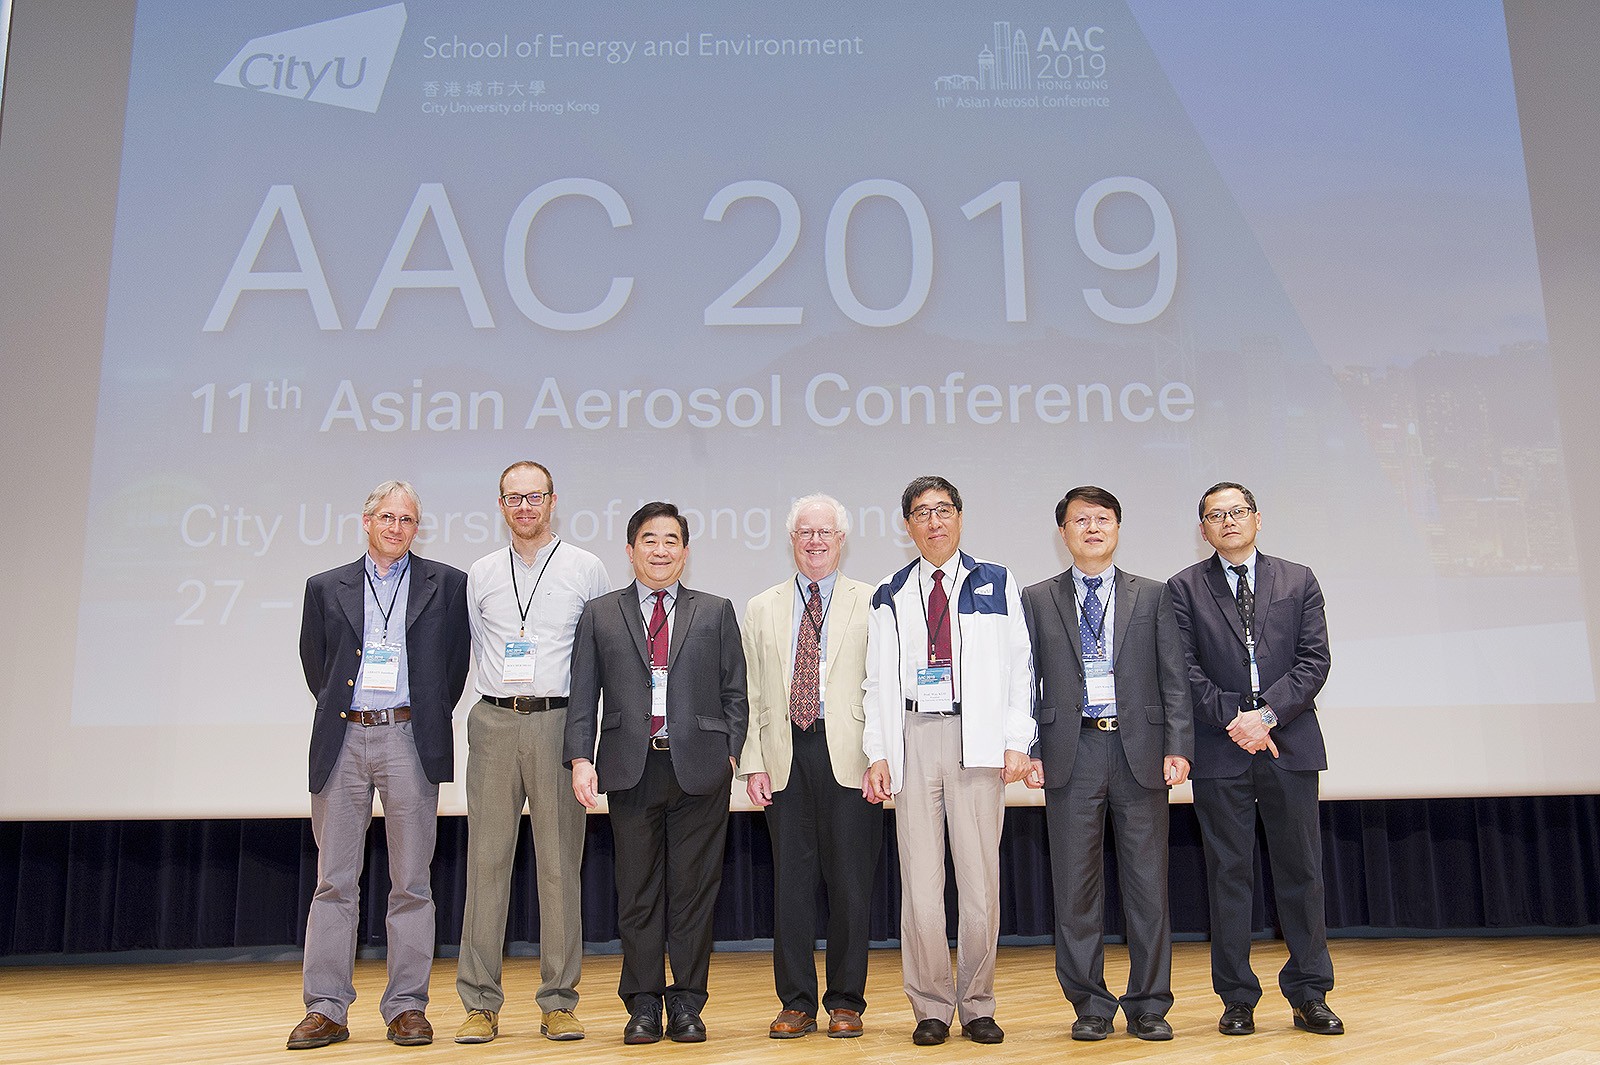 Aerosol science and technology is the focus of a major international conference that coincides with the 10th anniversary of SEE at CityU.